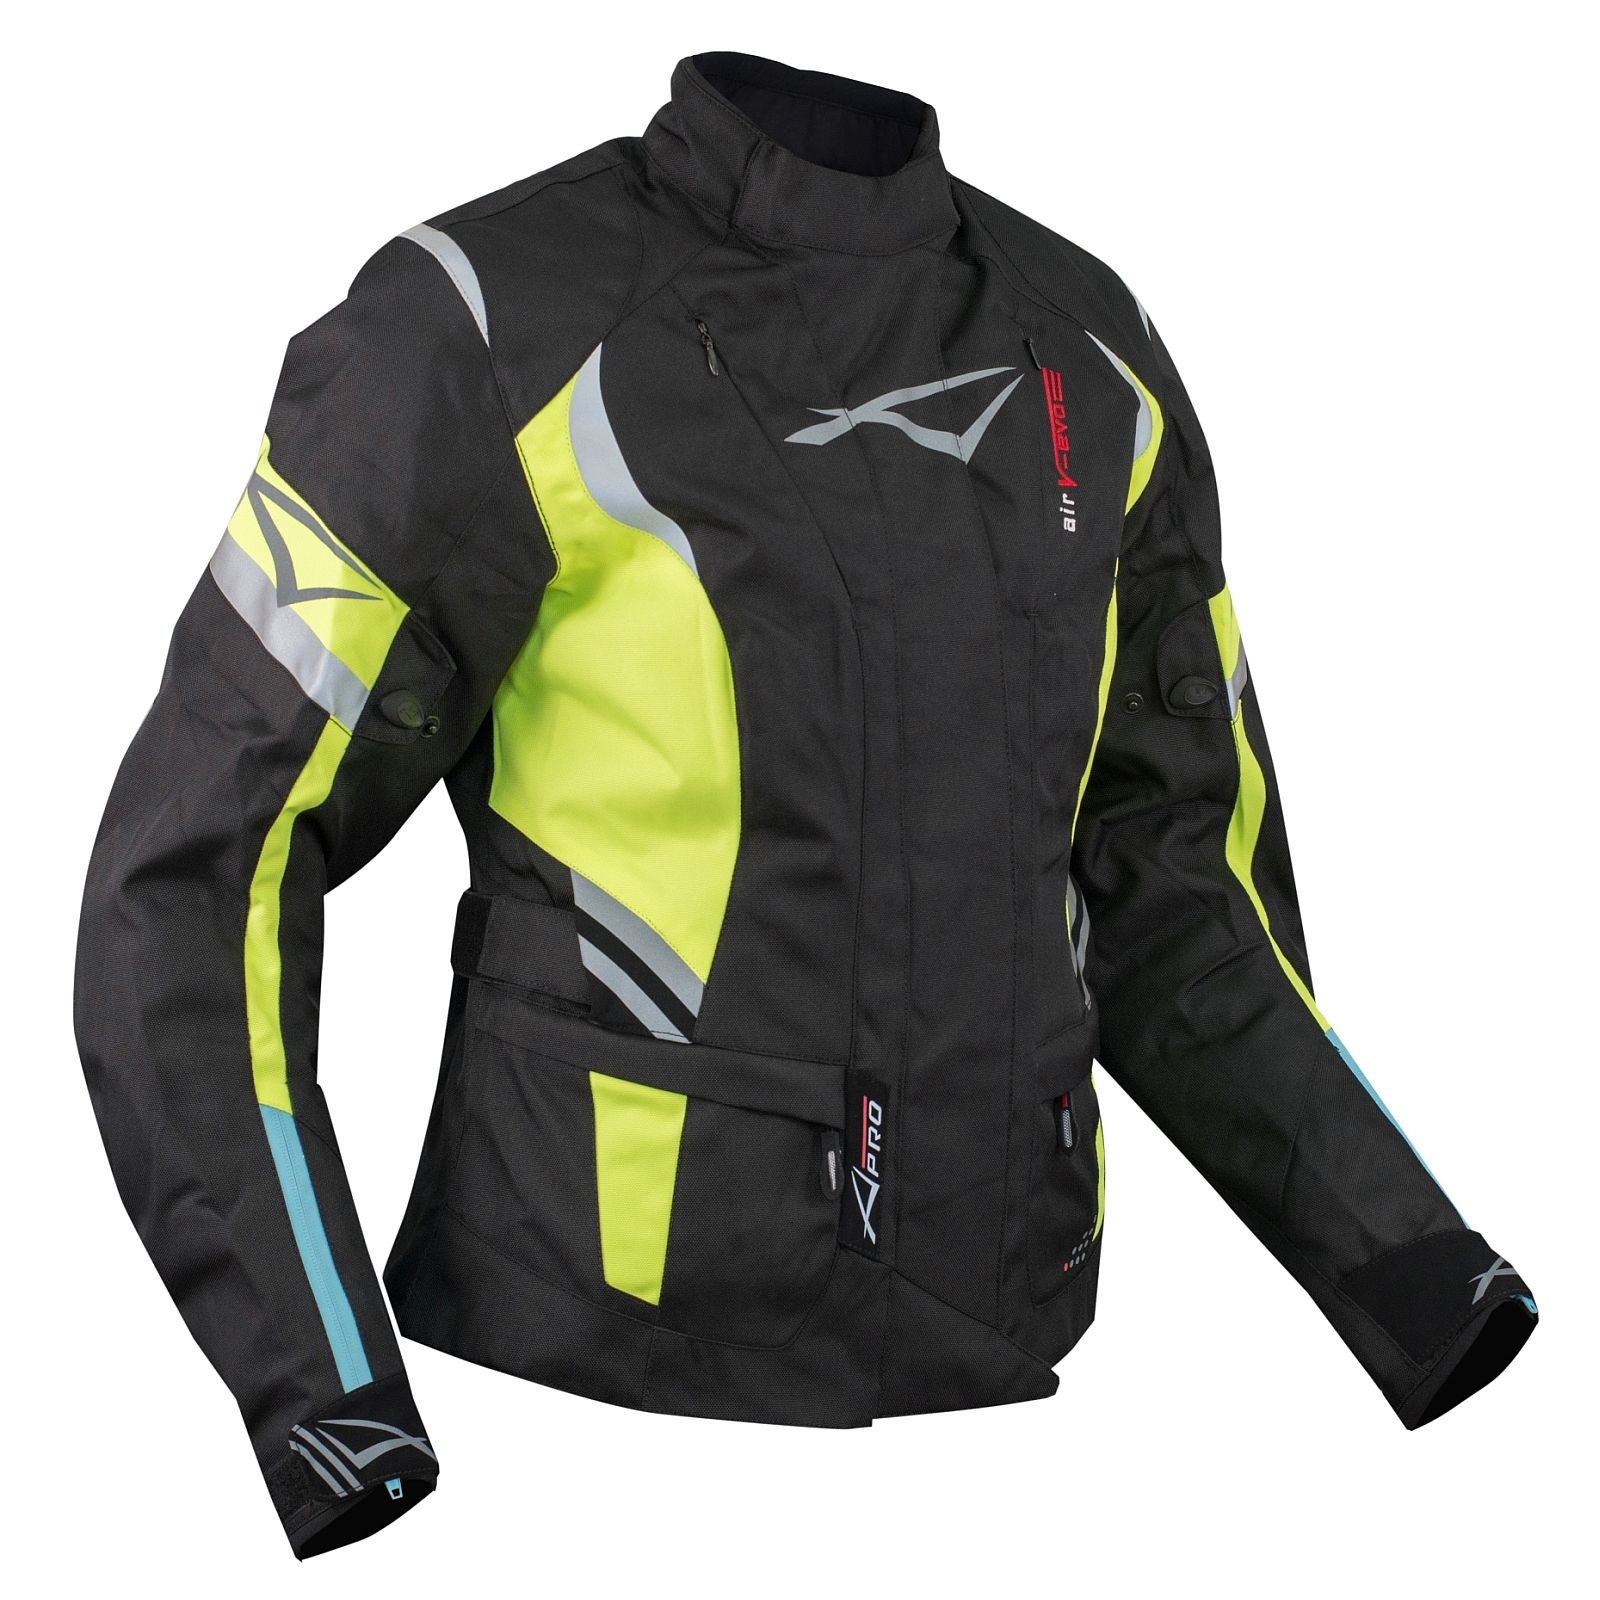 A-PRO - Giacca Moto Donna Lady Impermeabile 4 Stagioni Scooter Custom Sport  Fluo L - ePrice